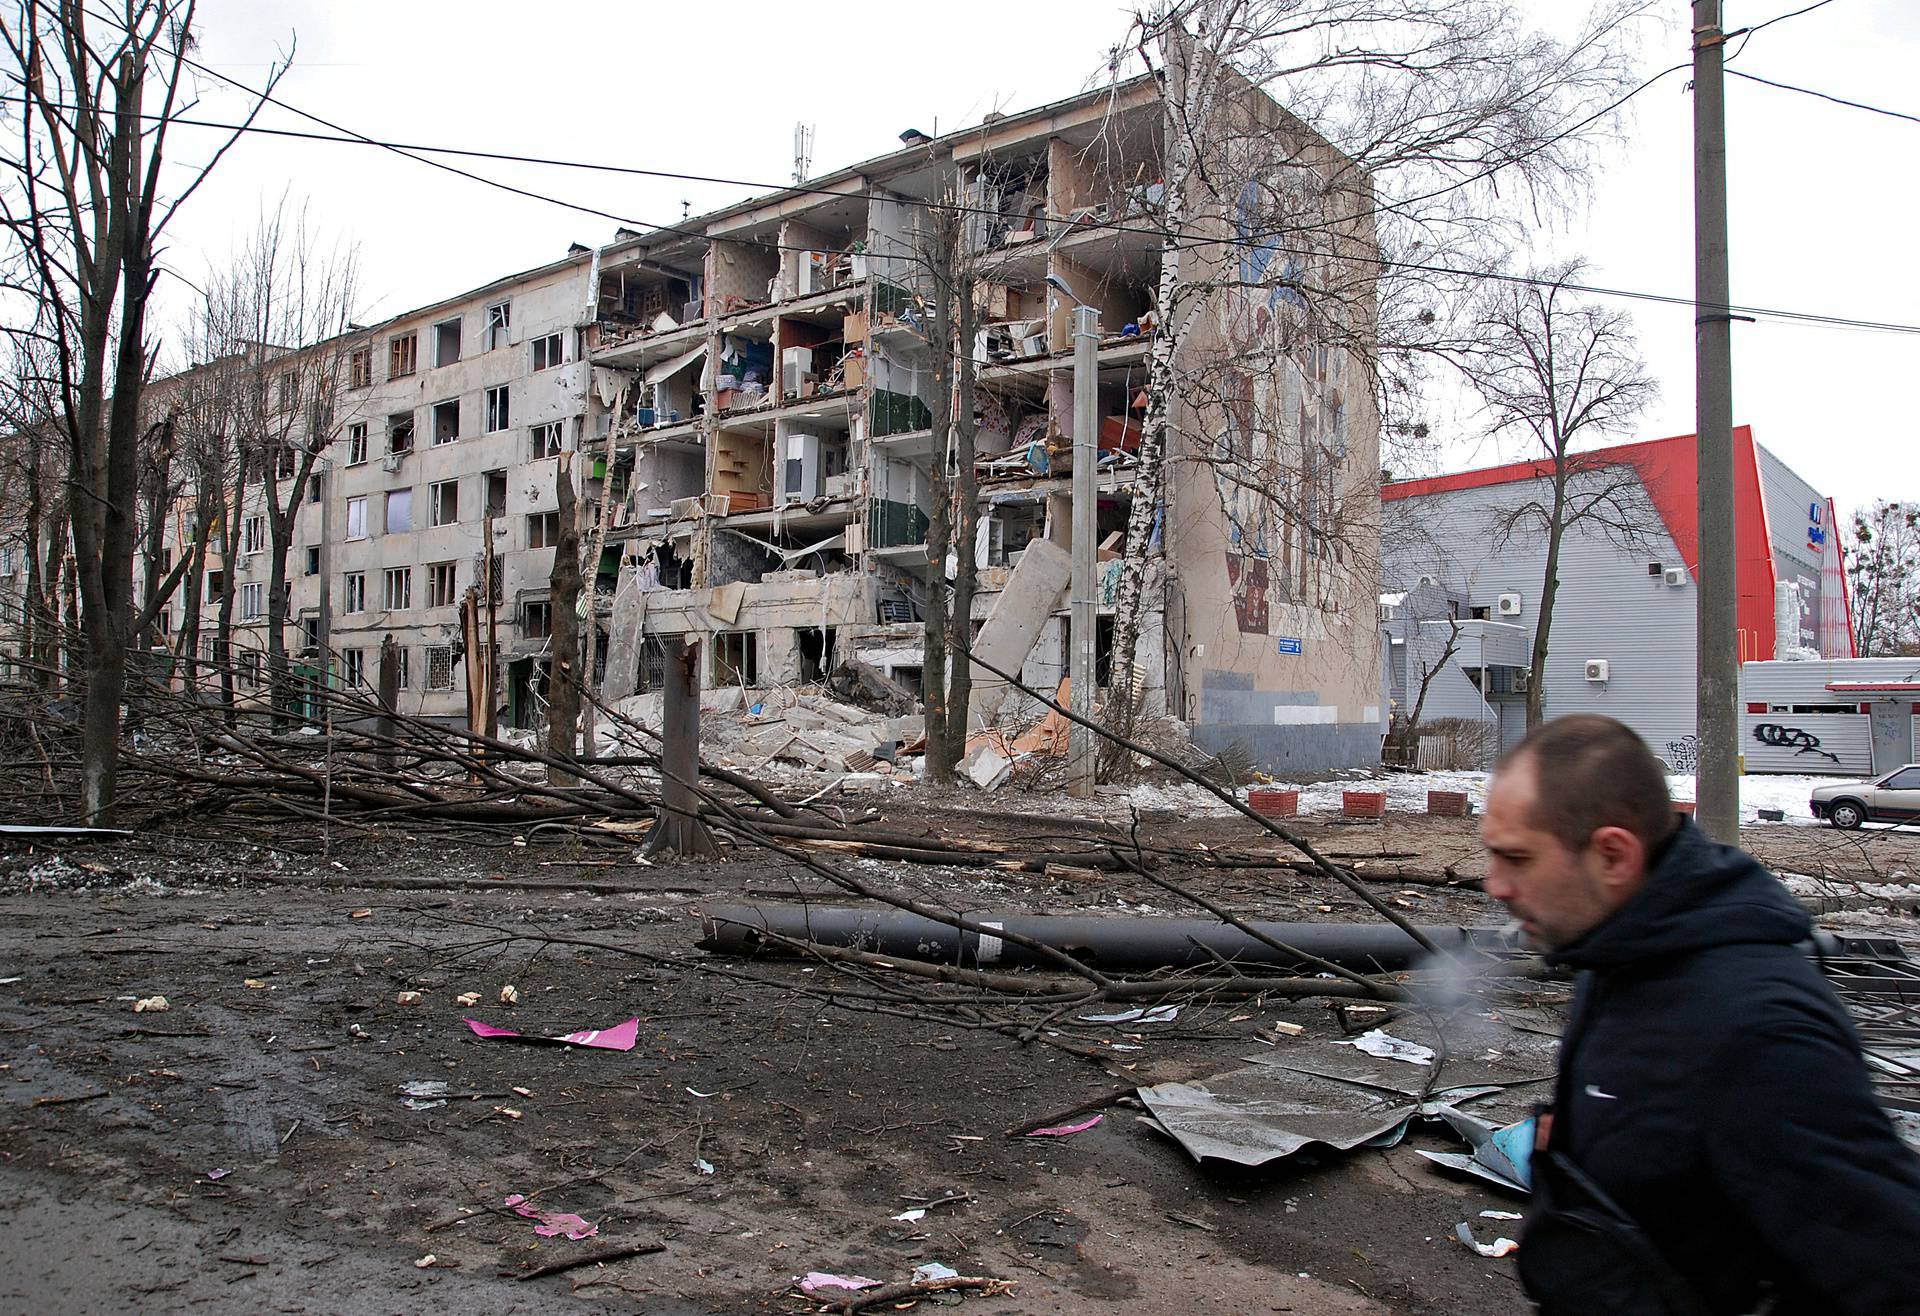 A view shows a residential building damaged by recent shelling during Ukraine-Russia conflict in Kharkiv